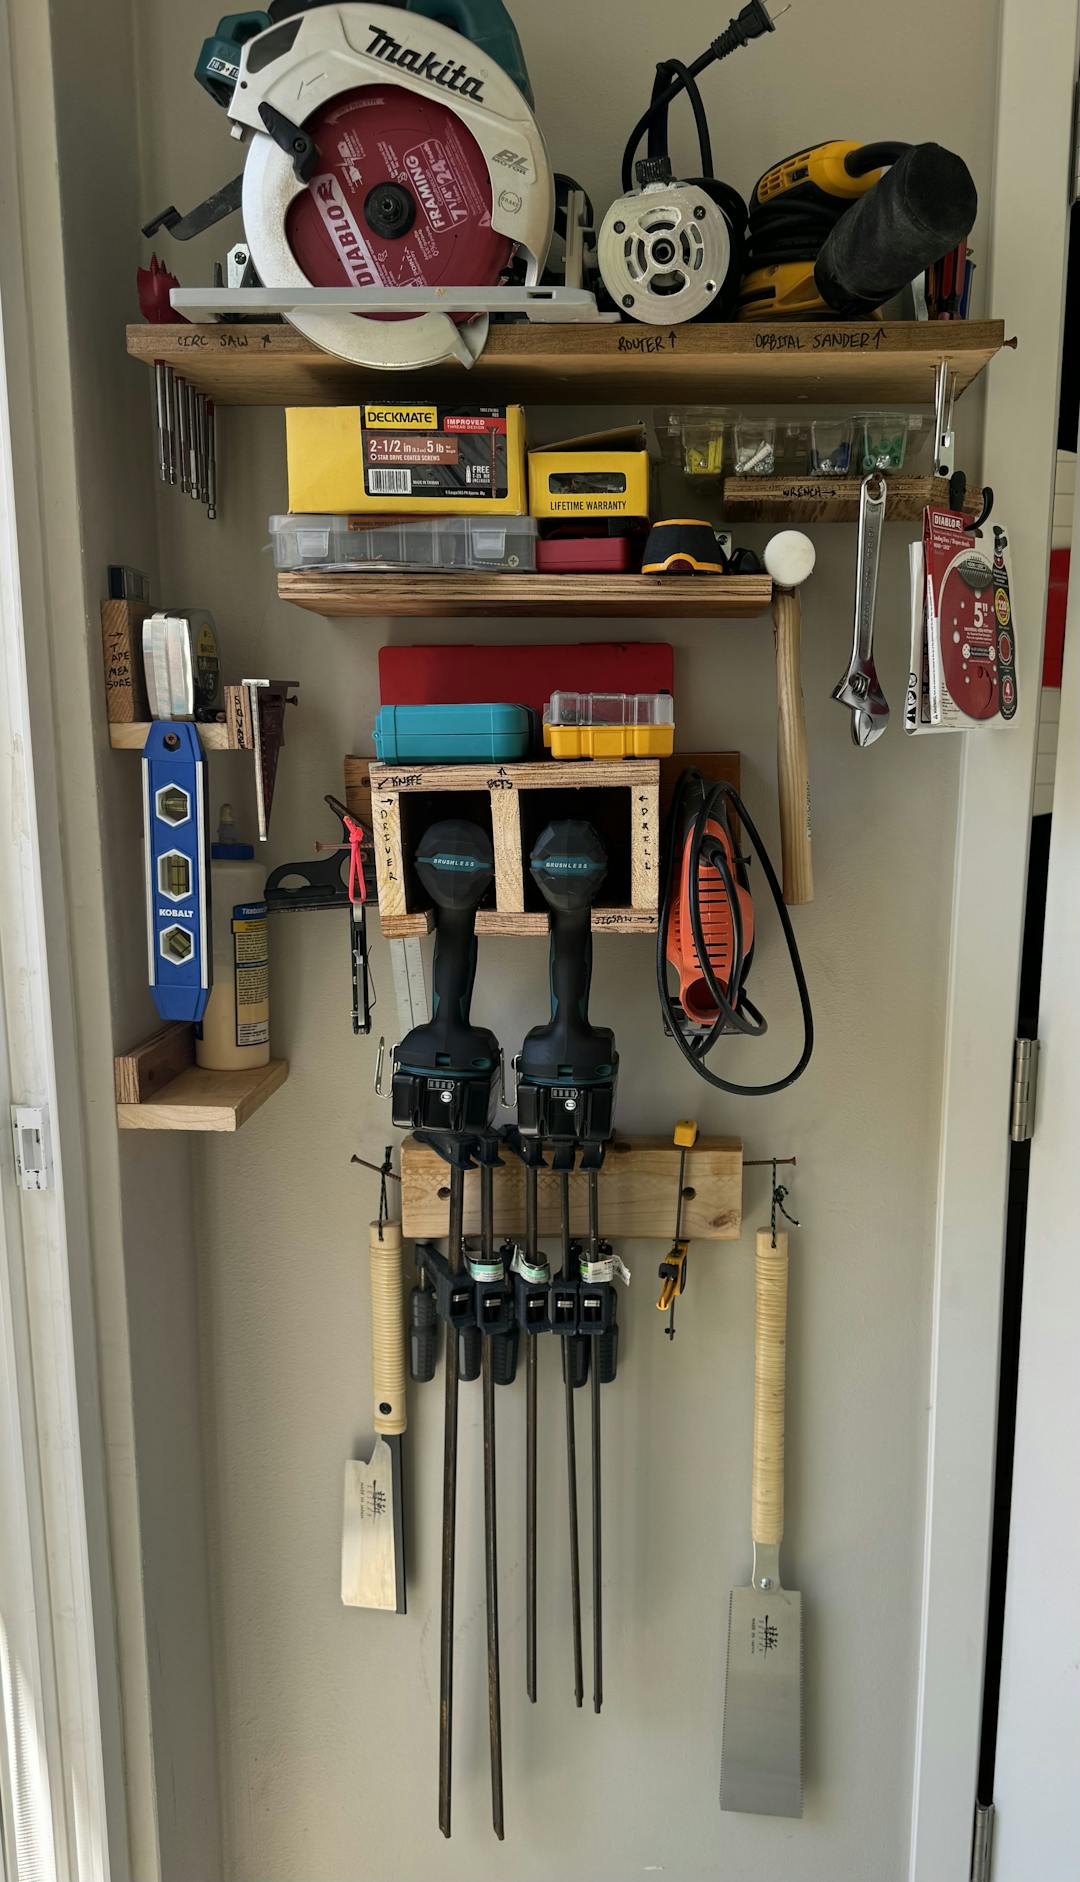 an image of a tool wall